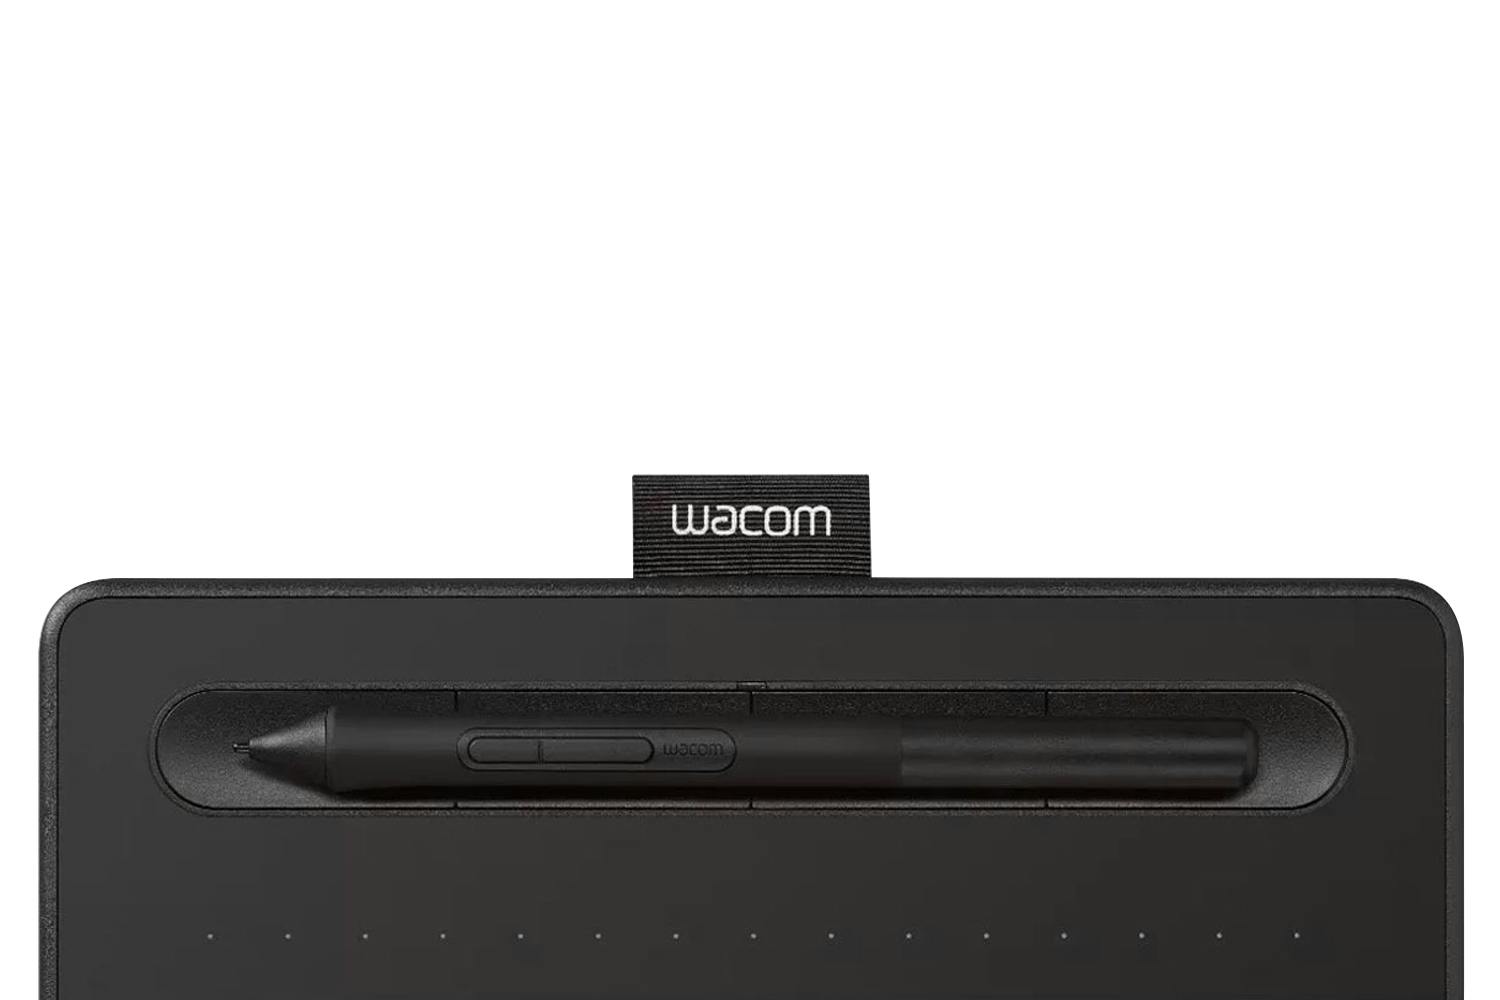 Wacom “Intuos S” Entry-Level Drawing Tablet — Tools and Toys